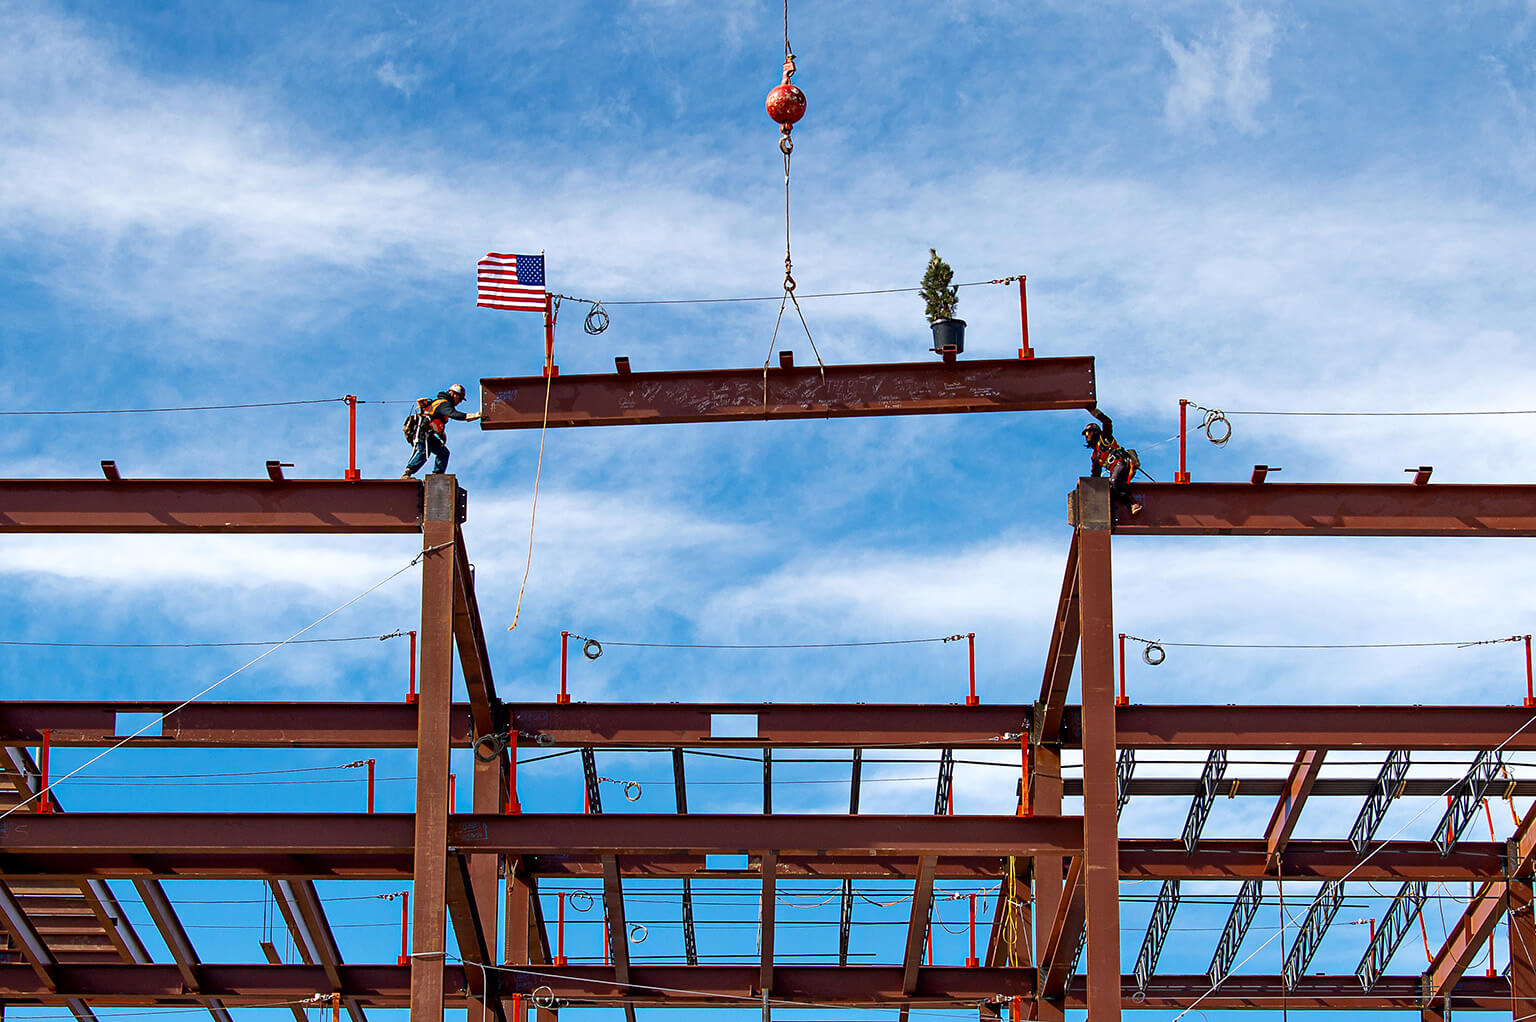 Madera Cyber Innovation Center topping off